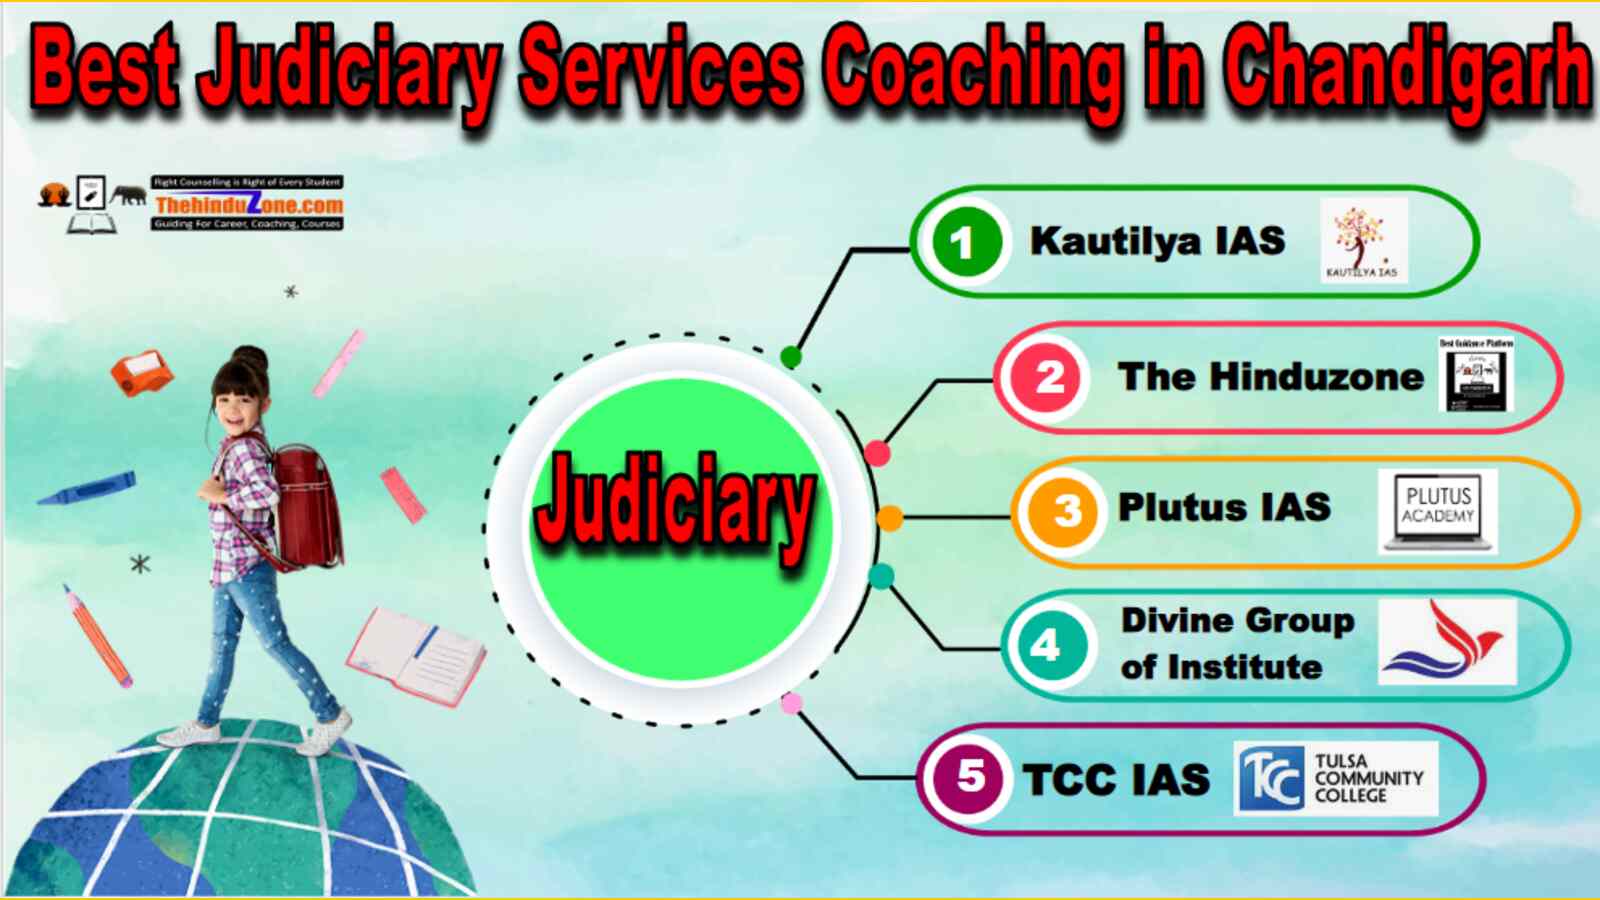 Best Judiciary Services Coaching In Chandigarh